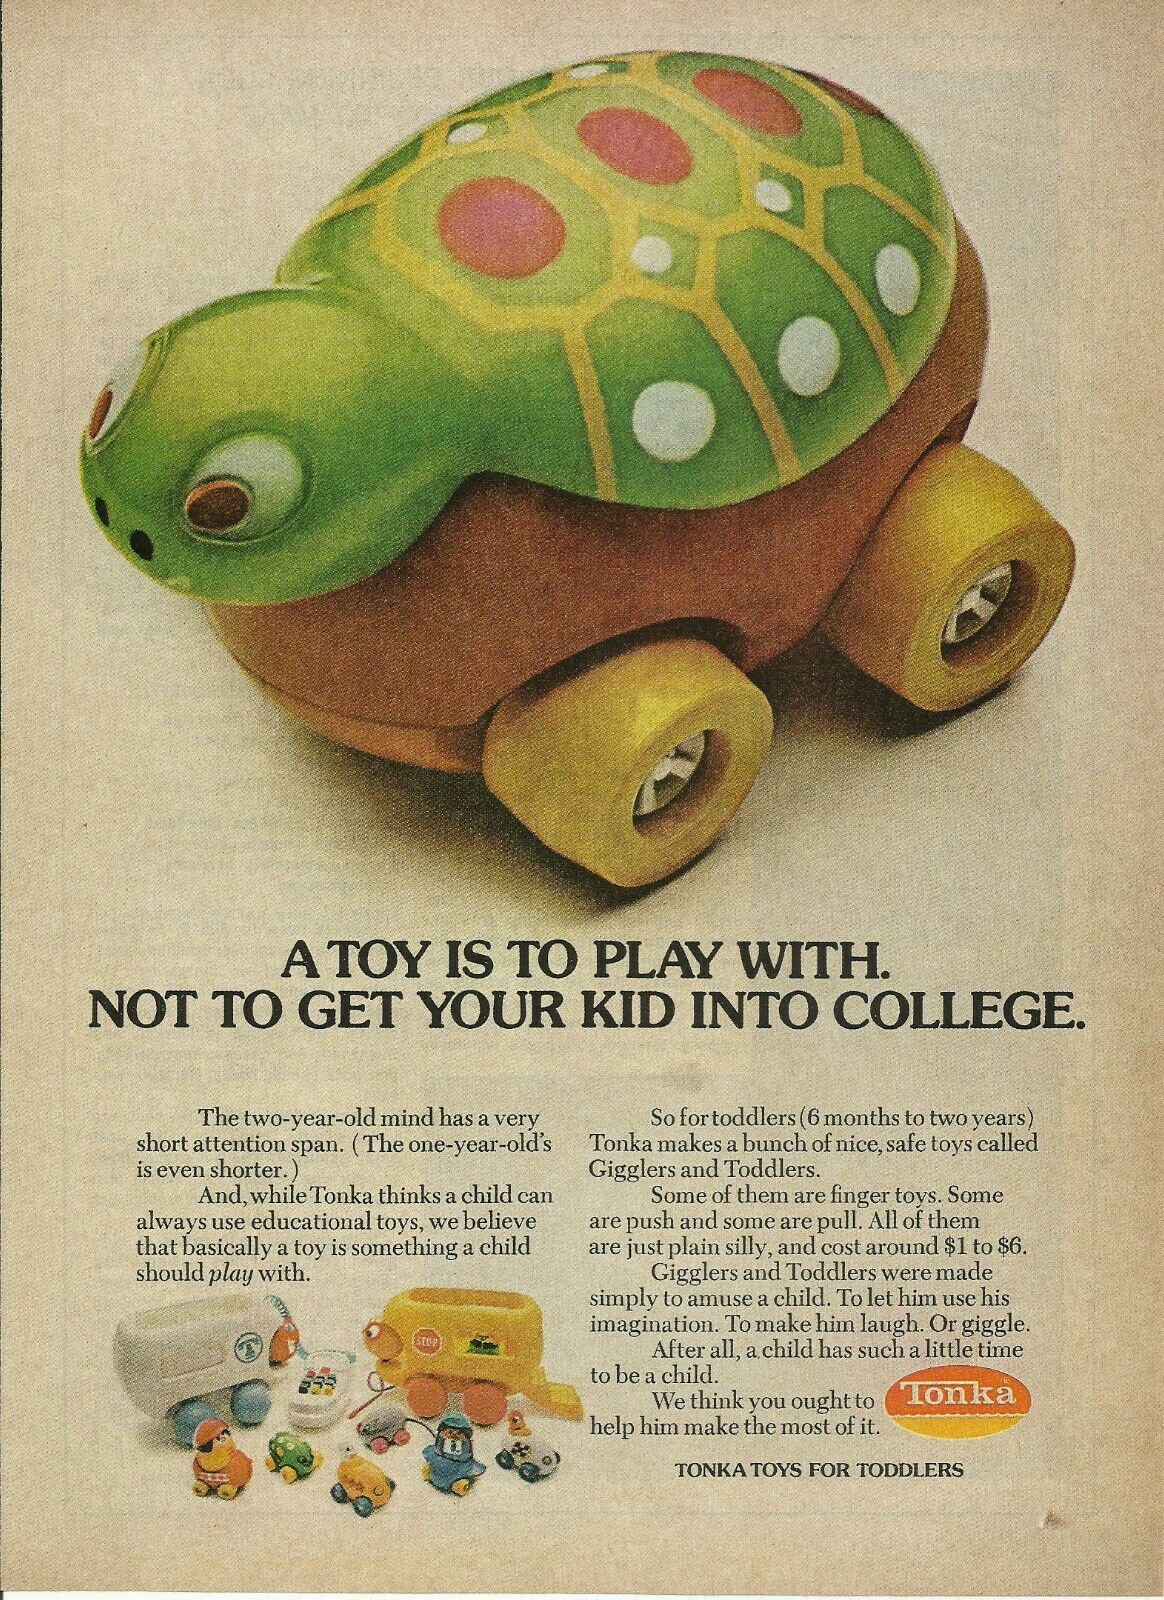 1973 Tonka Gigglers Toddlers Turtle vintage print ad 70\'s Toy advertisement